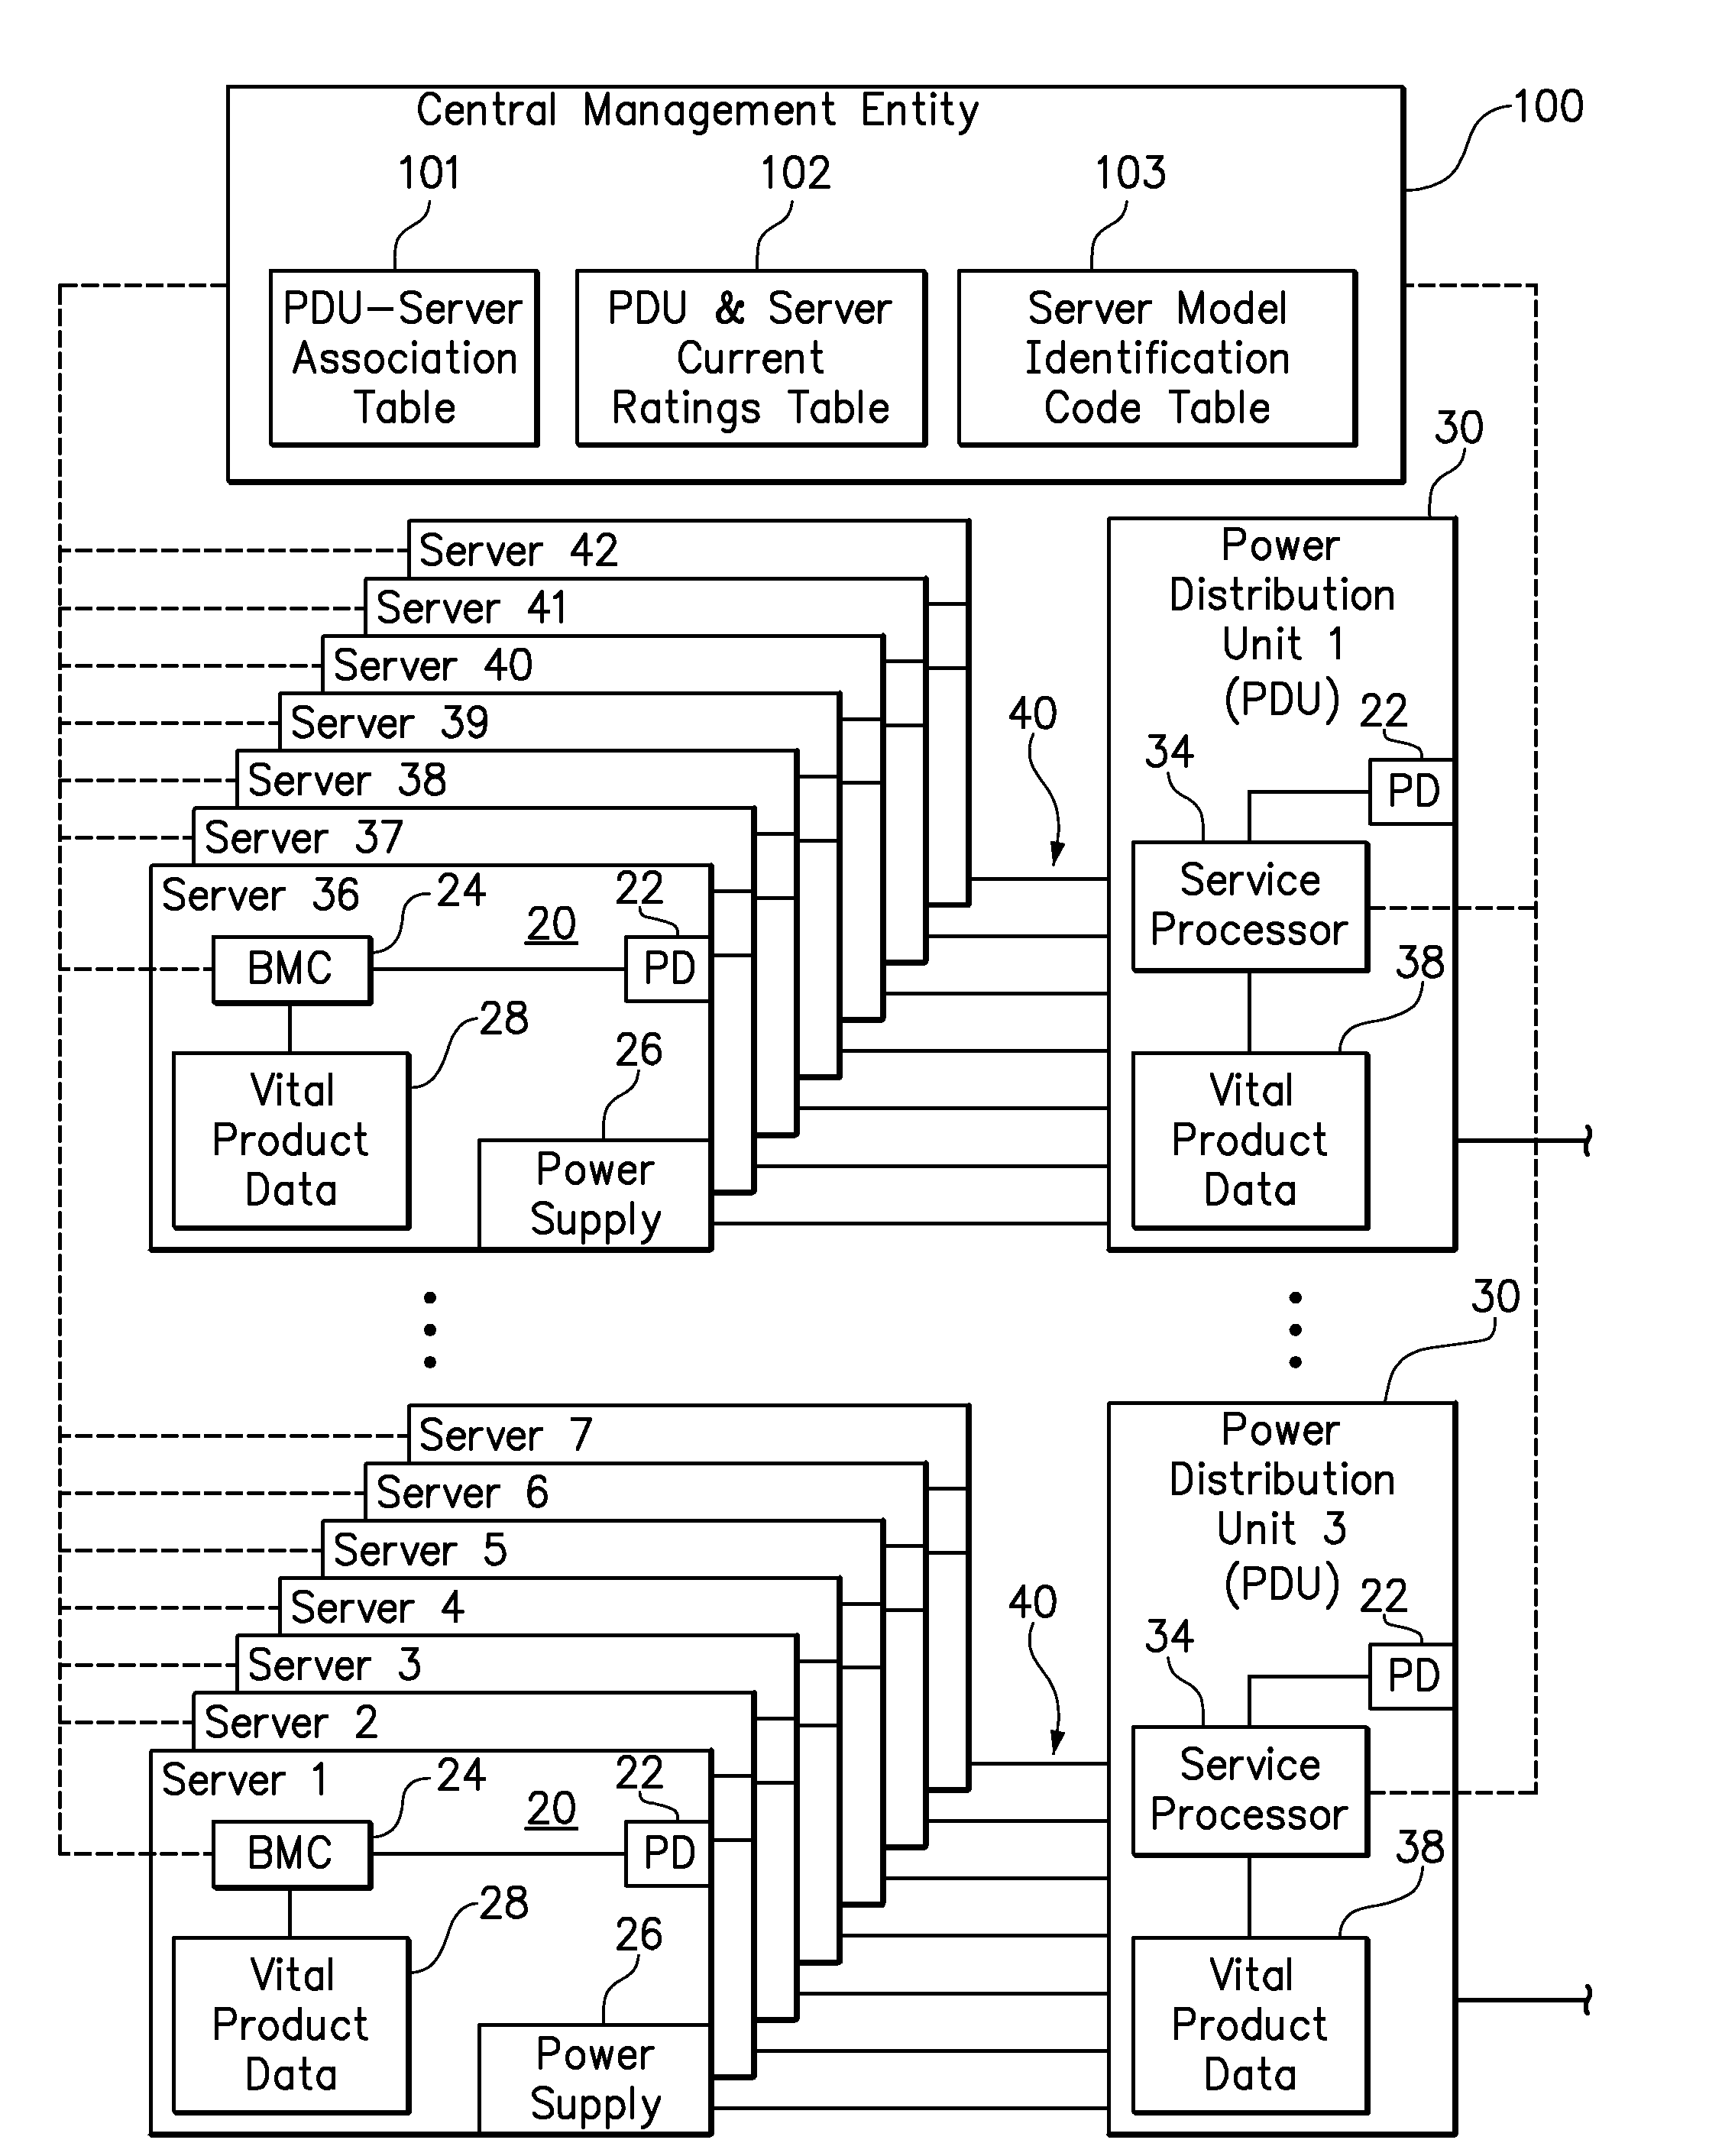 Sequential power up of devices in a computing cluster based on relative commonality